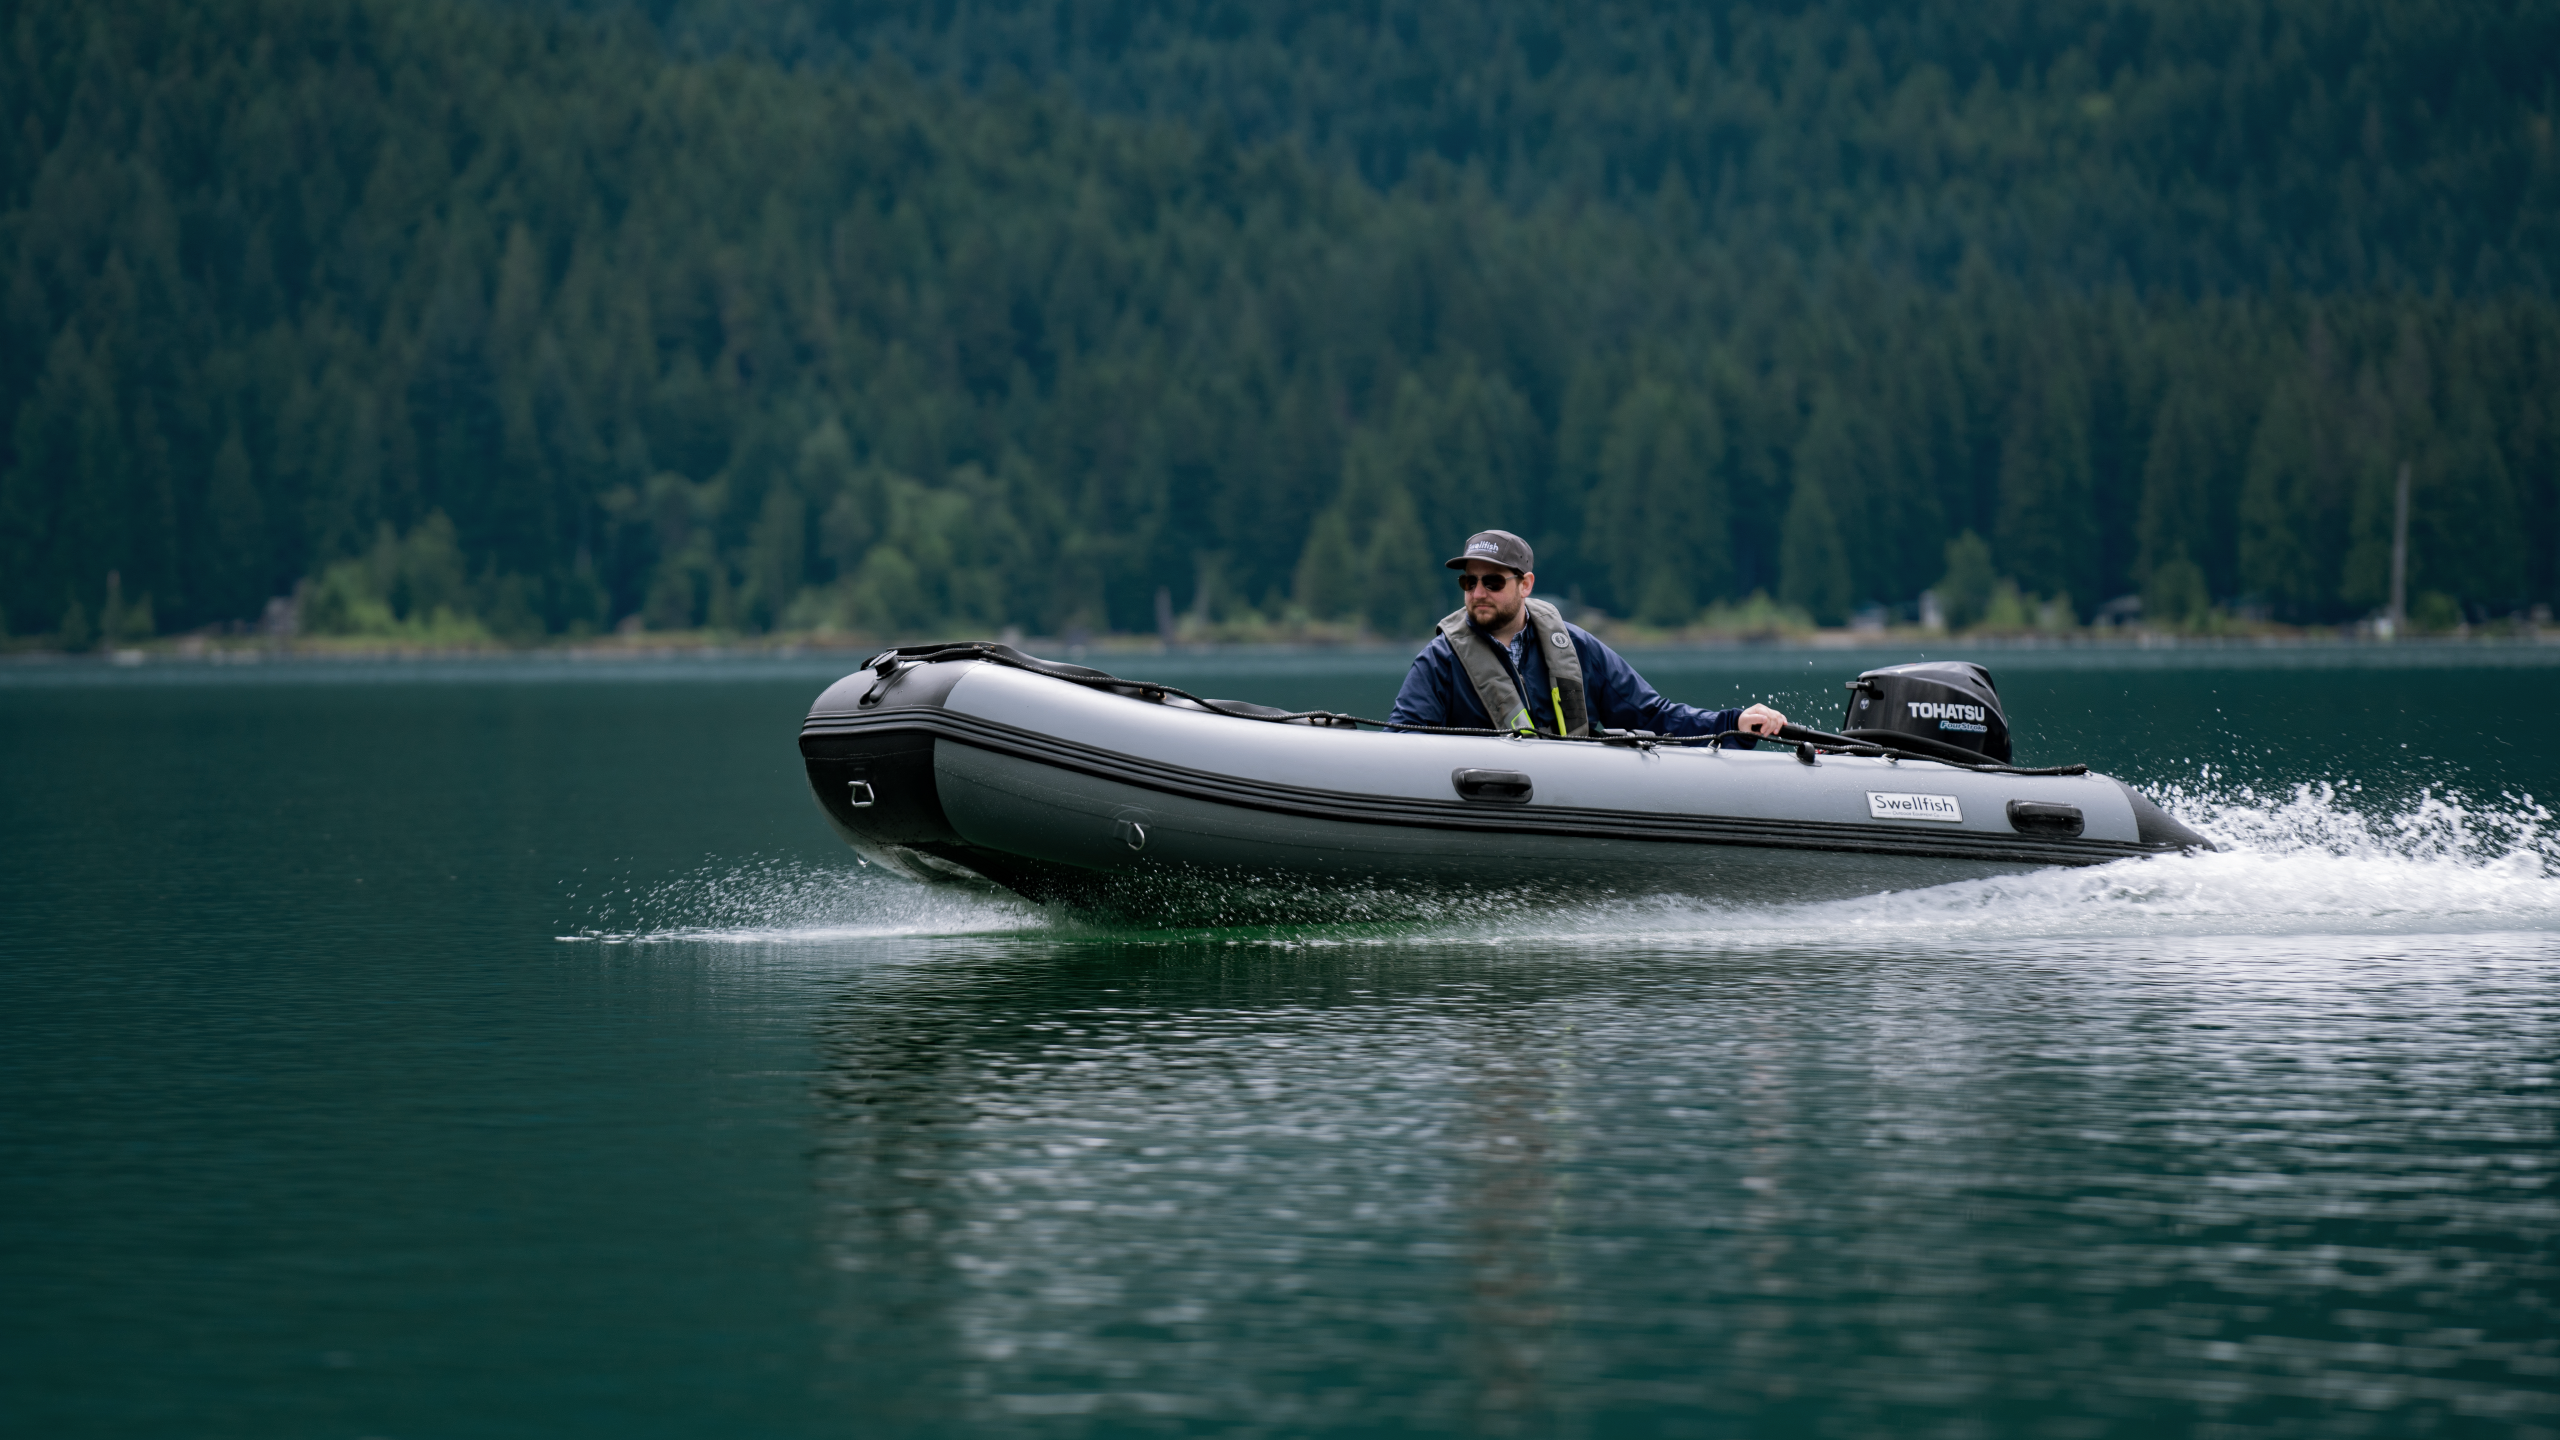 A Classic 390 traveling across the lake, this is the perfect family fishing boat. 